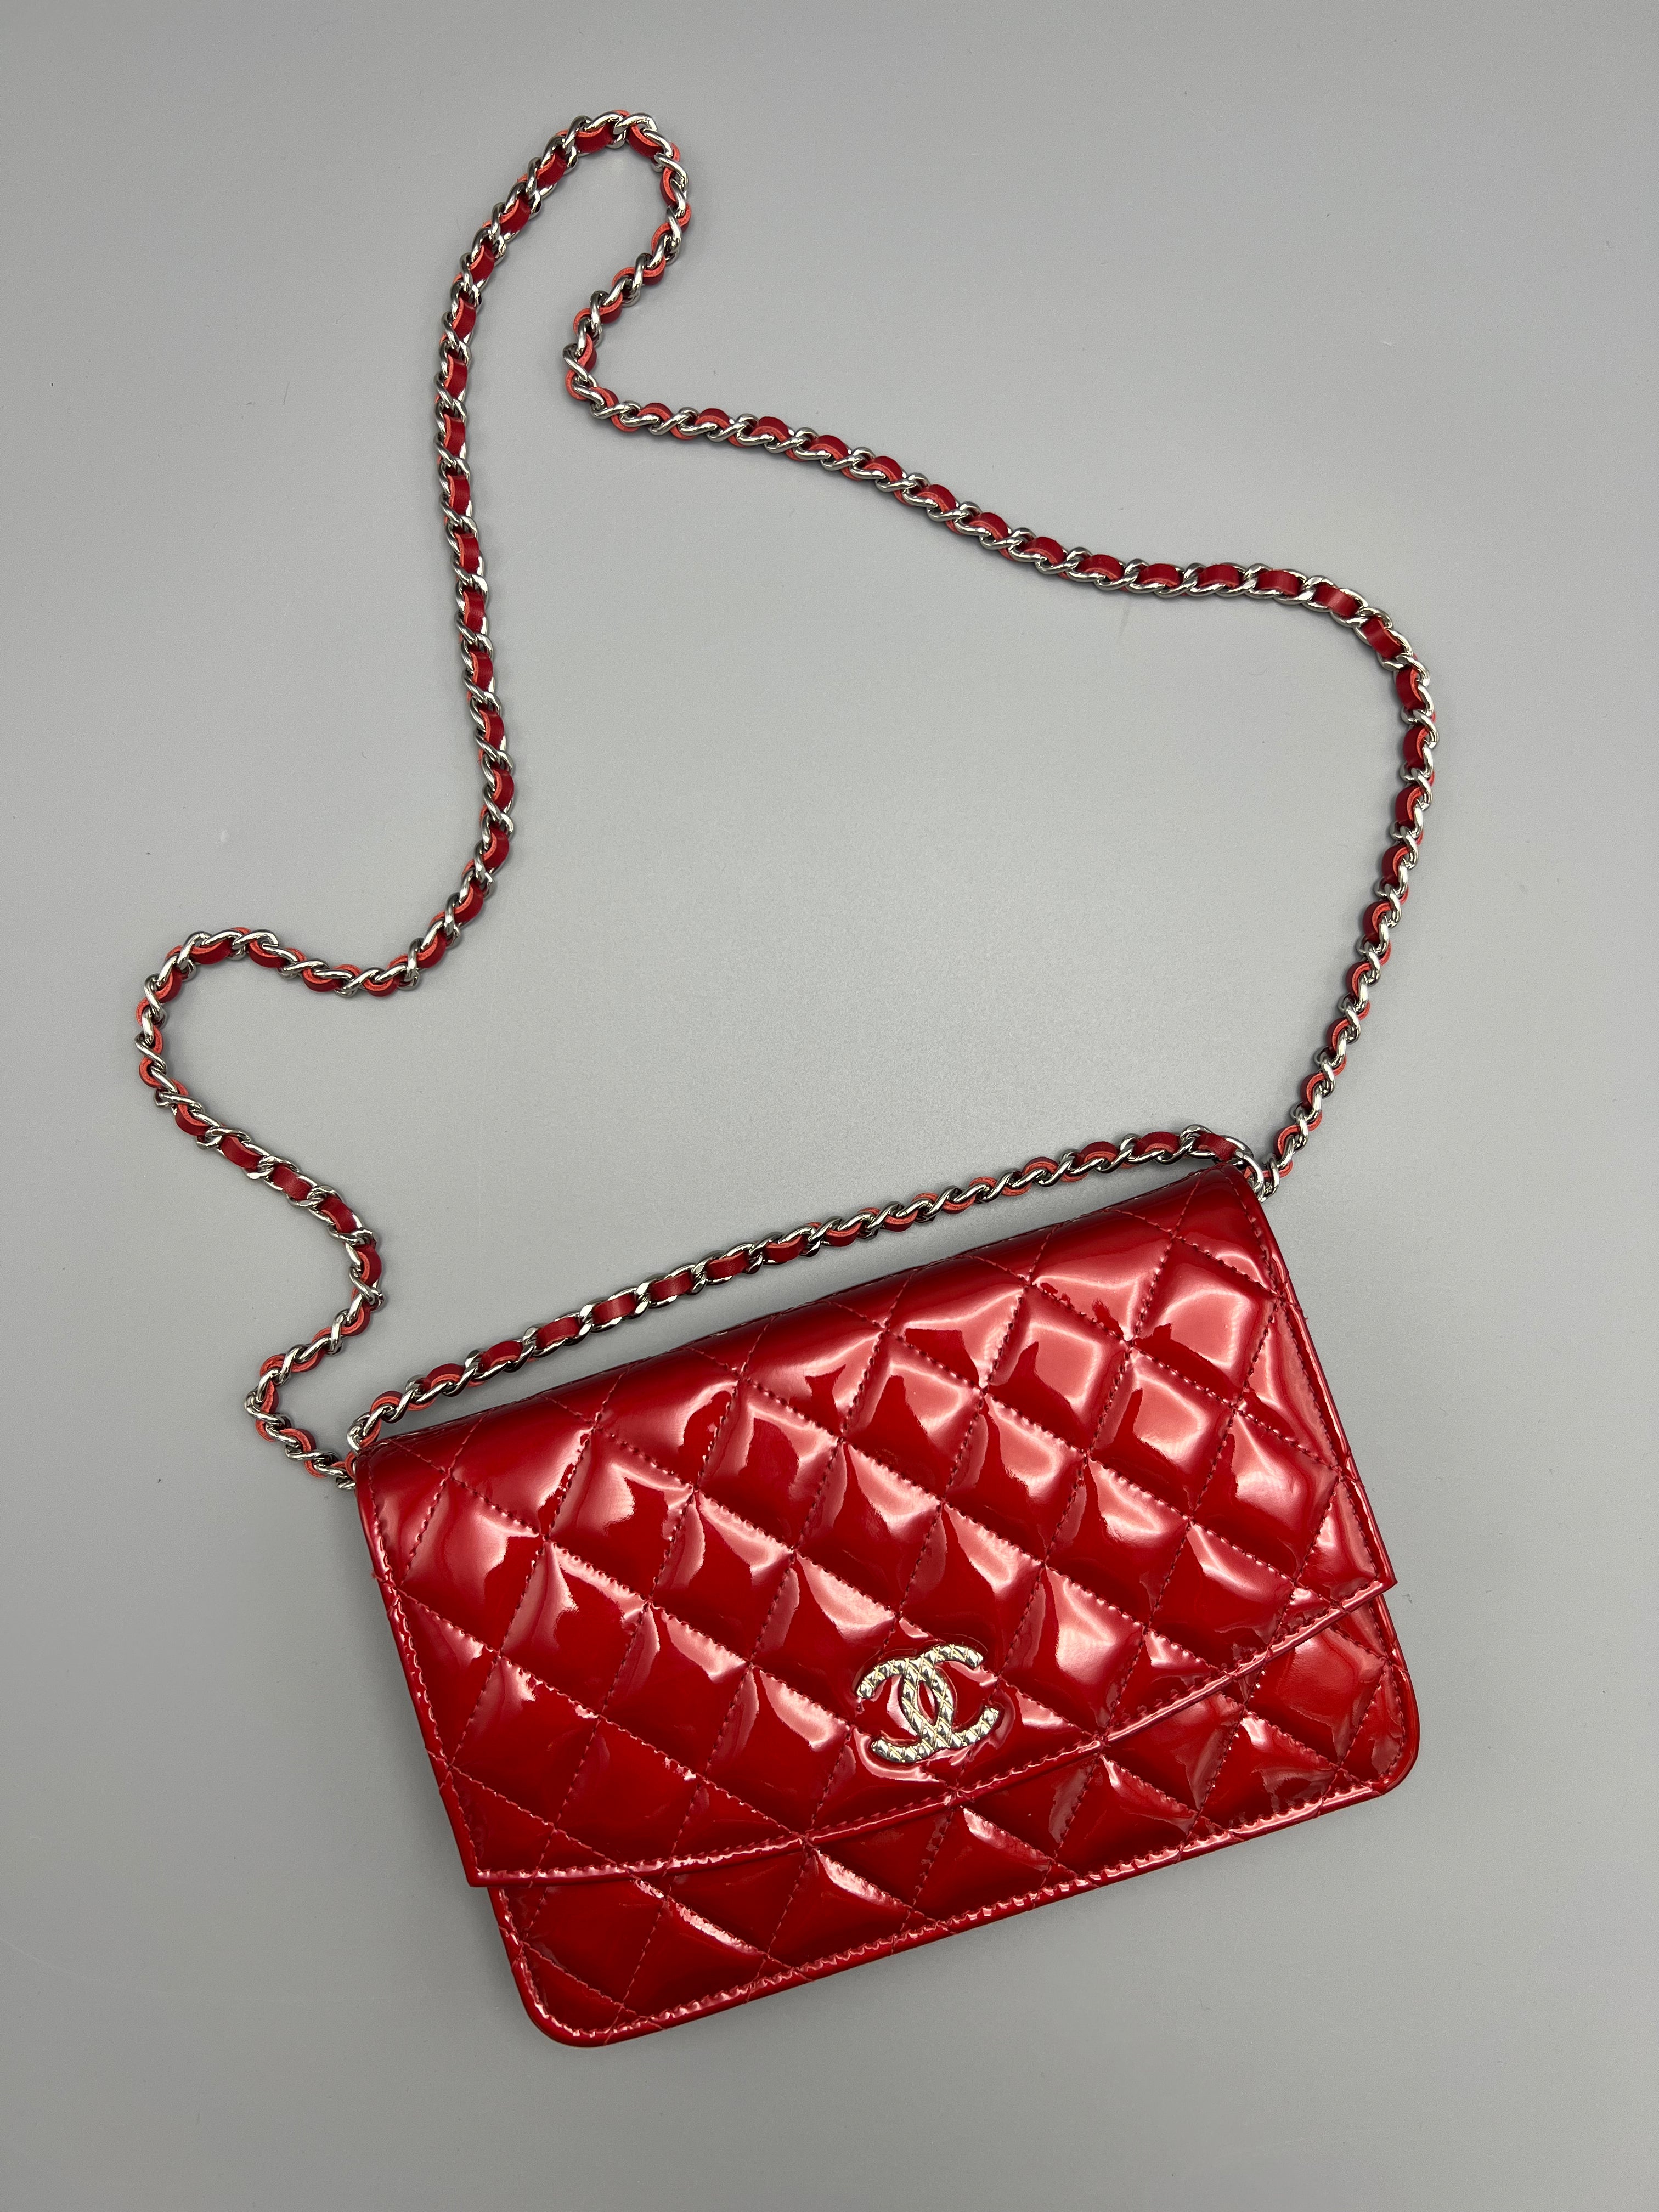 Chanel Timeless Wallet On Chain Patent Red